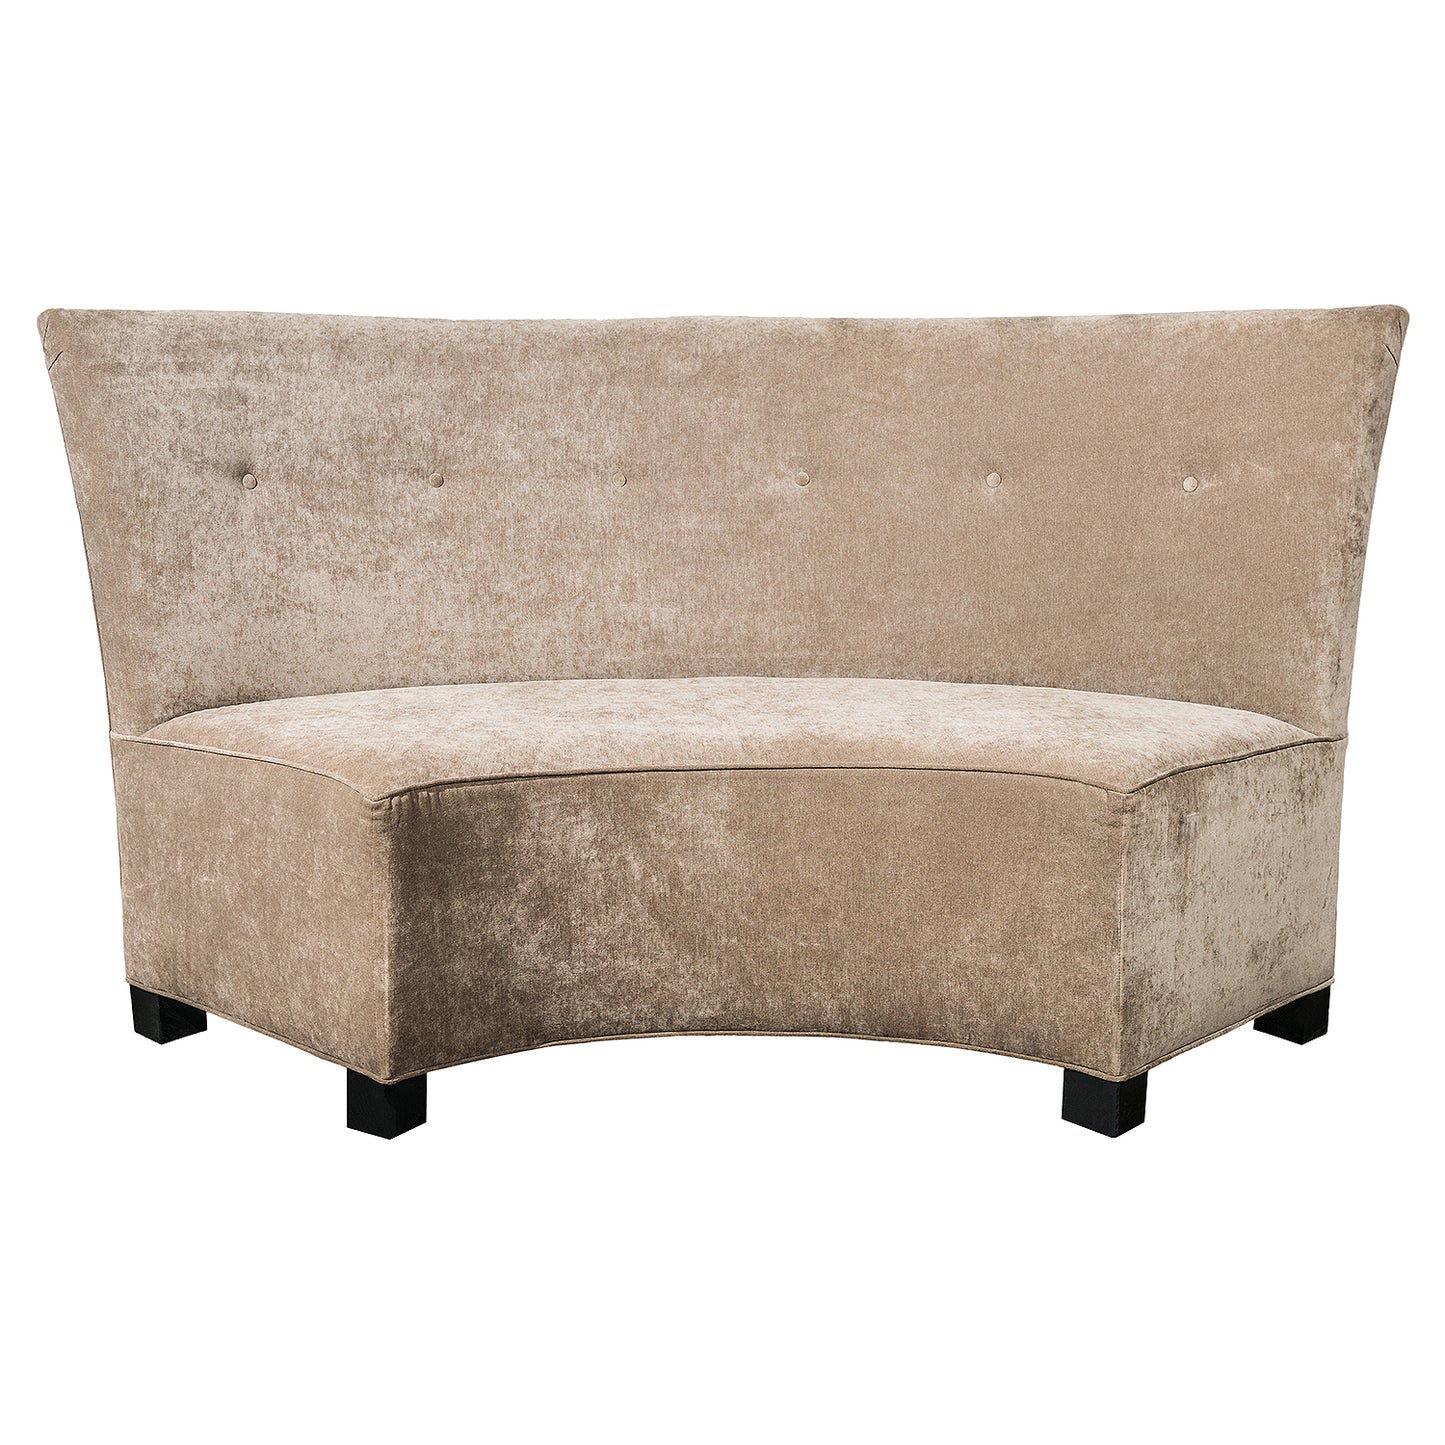 Soho Taupe Curved Banquette